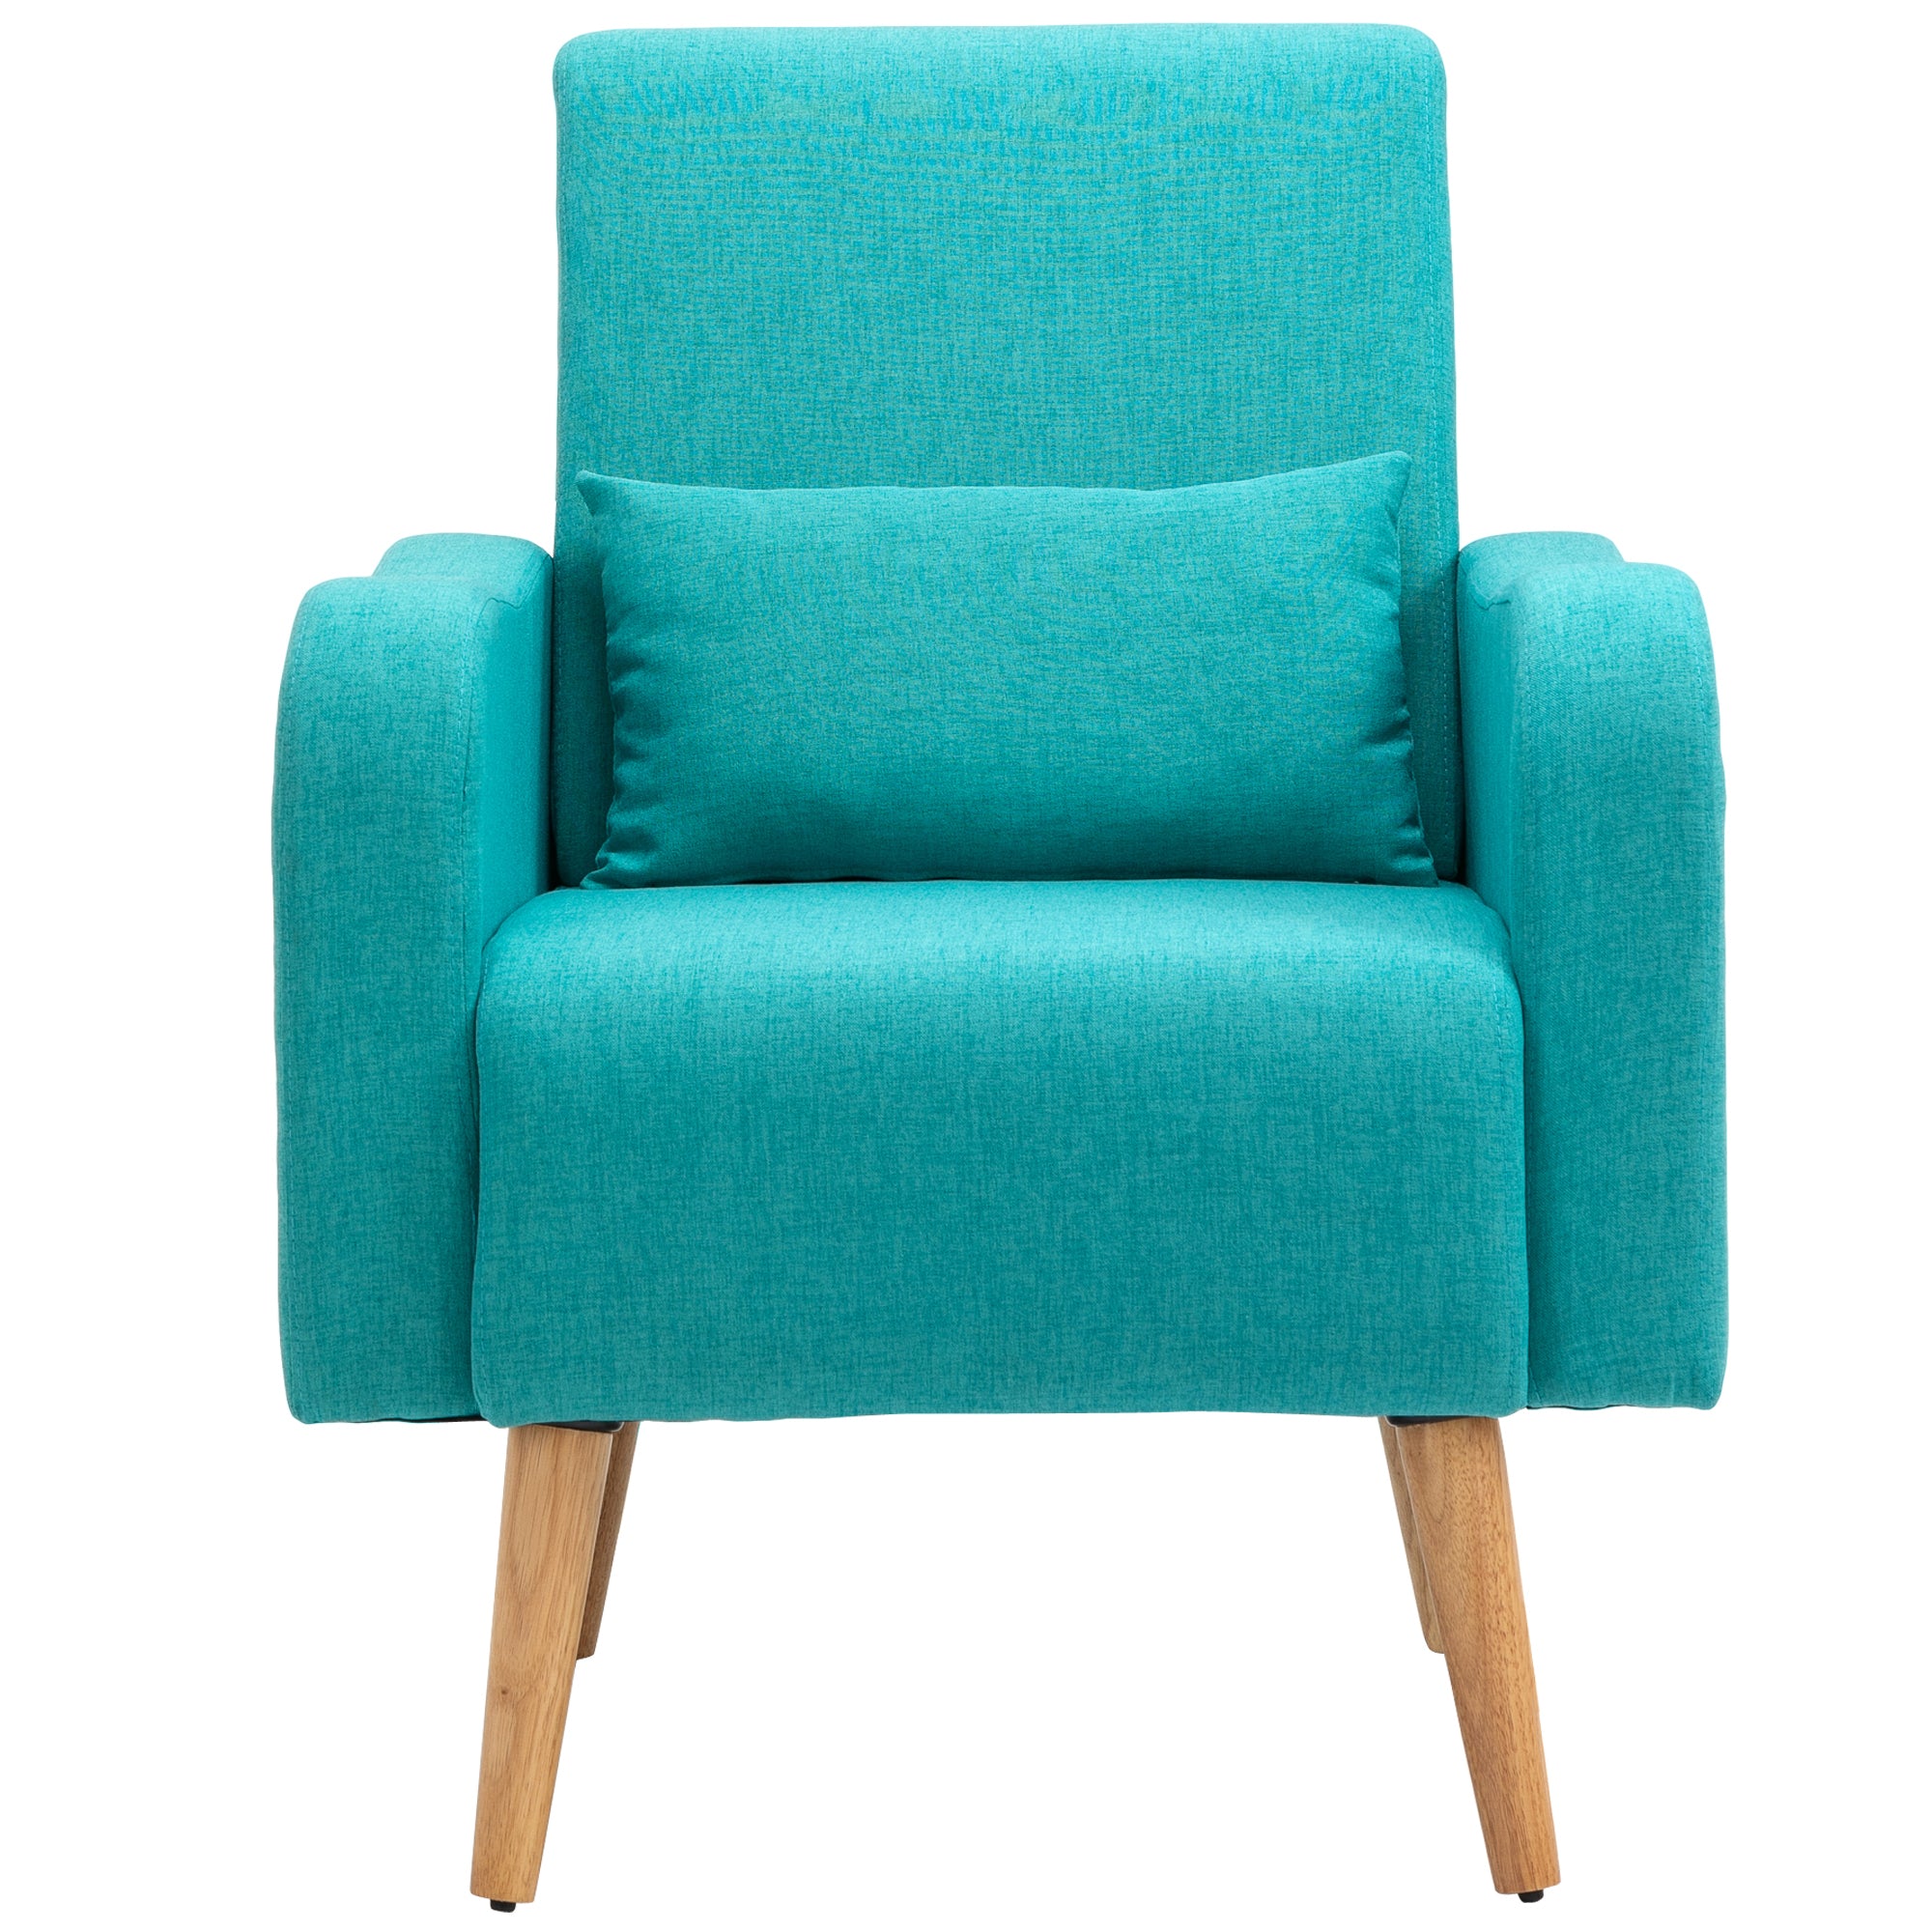 HOMCOM Nordic Leisure Lounge Sofa Accent Chair with Pillow for Bedroom Teal  | TJ Hughes